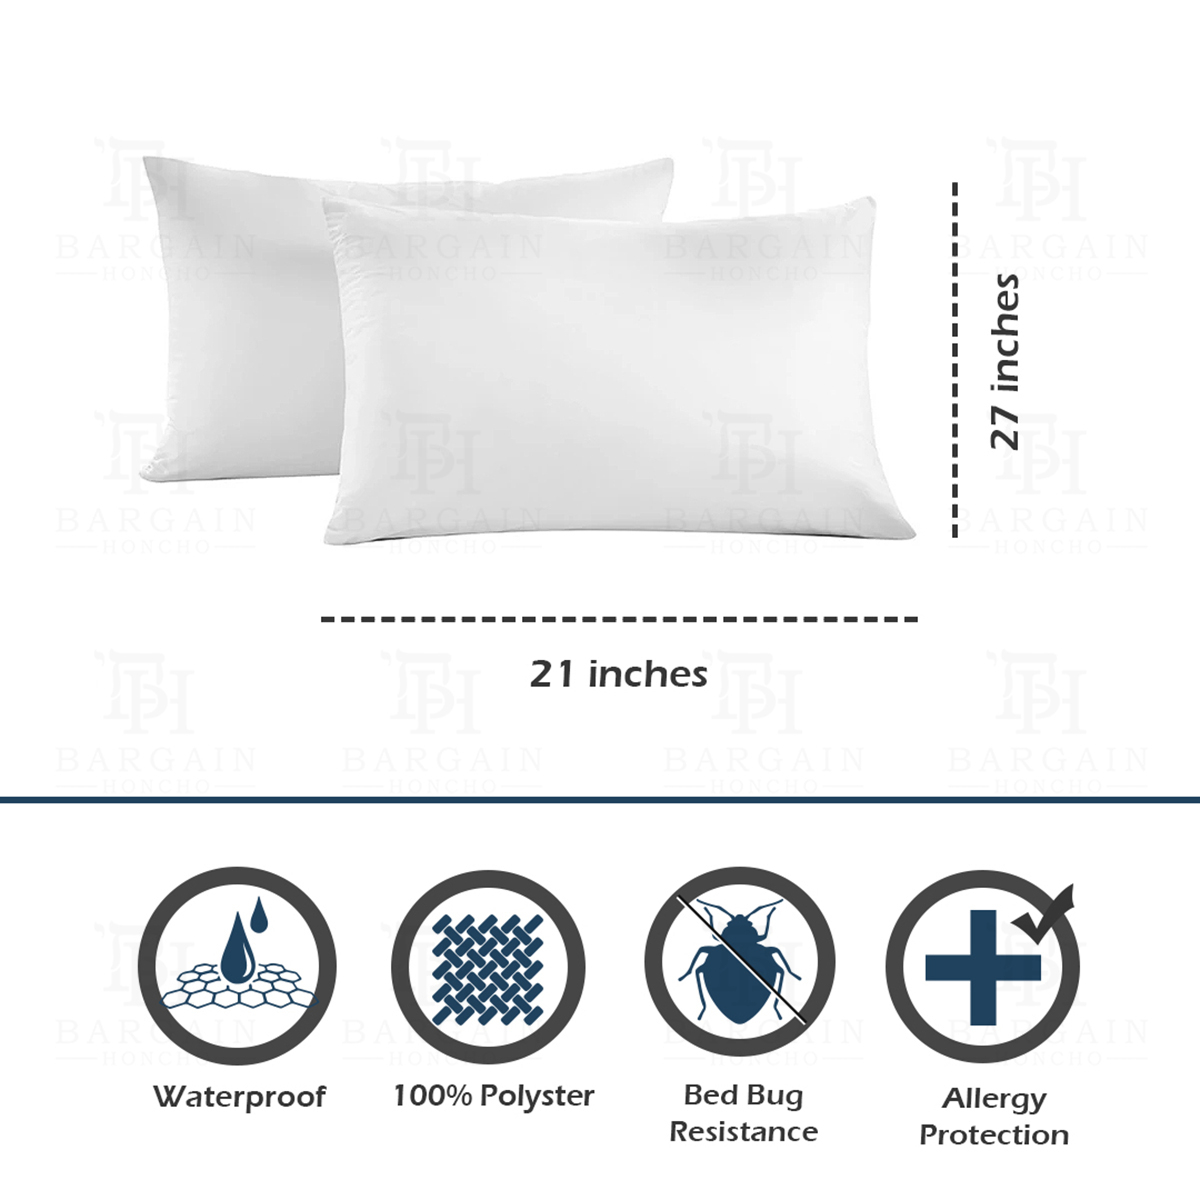 Multi-Pack: Heavyweight Zippered Waterproof Bed Bug/Dust Mite Vinyl Pillow Covers - 4-Pack